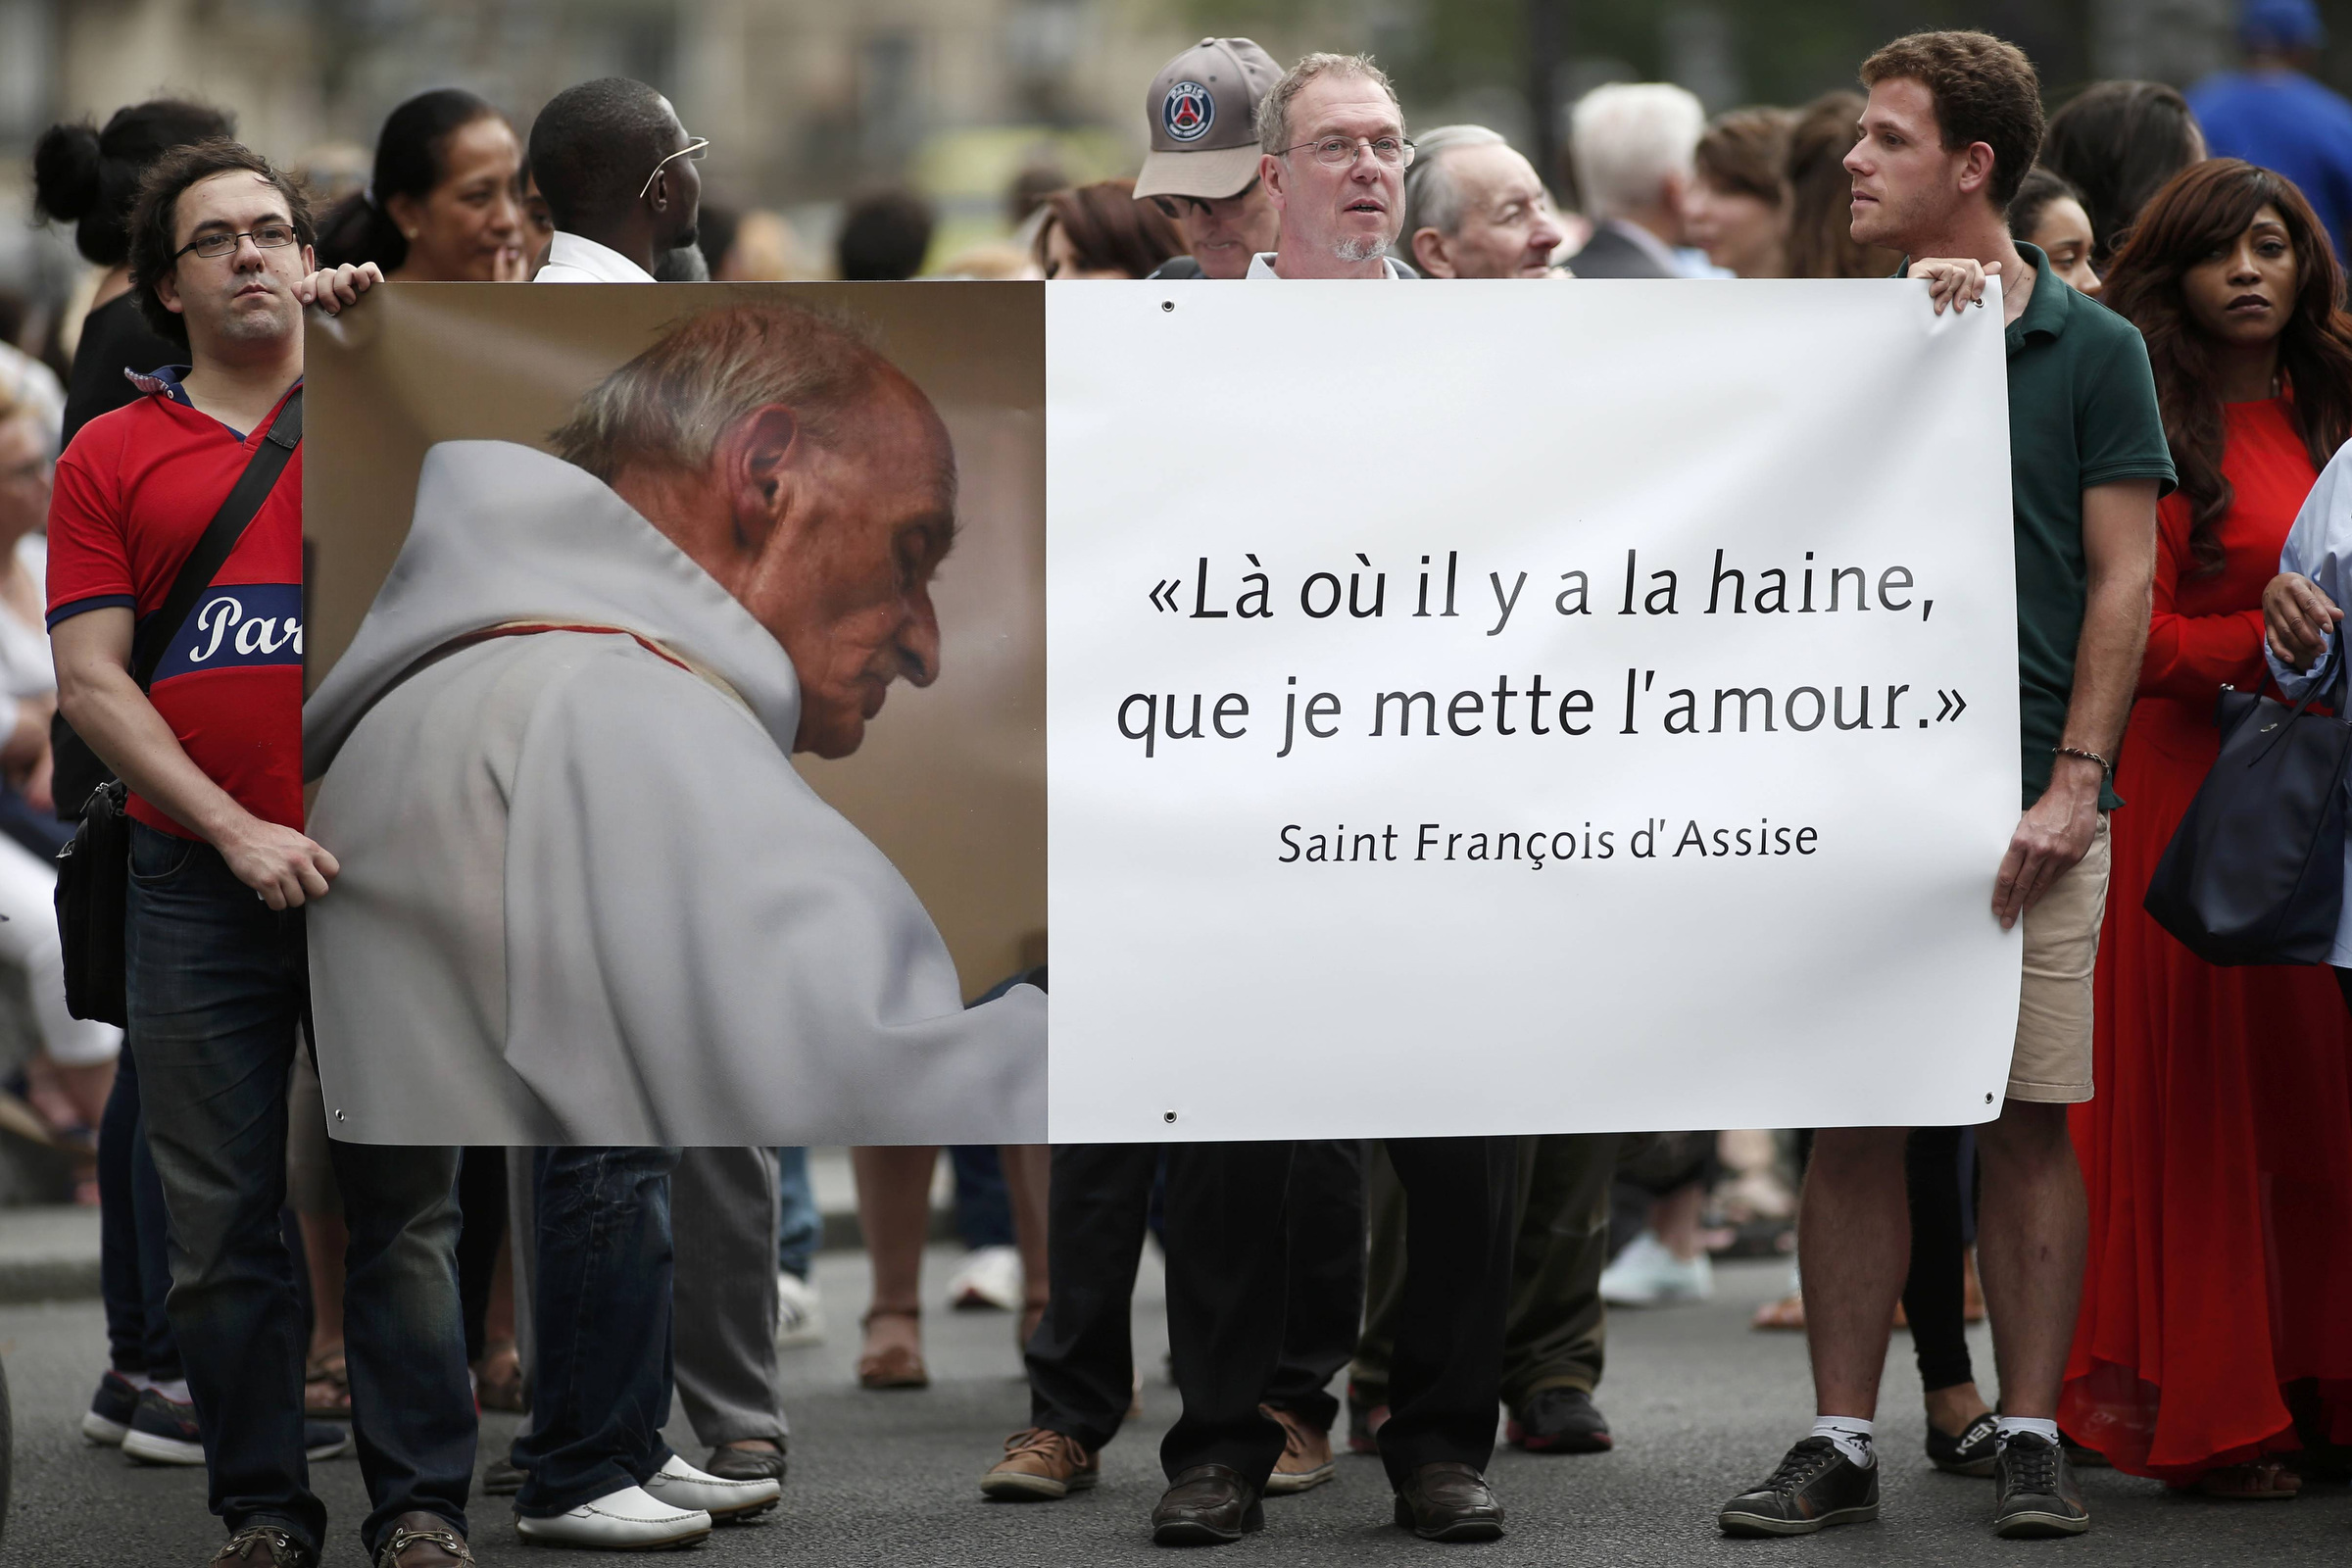 People hold a banner with a picture of French priest Father Jacques Hamel, which reads, "Where there is hatred, let me sow love," after a July 27 Mass at the Notre Dame Cathedral in Paris. Father Jacques Hamel was killed in a July 26 attack on a church at Saint-Etienne-du-Rouvray near Rouen by assailants linked to Islamic State groups. (CNS photo/Benoit Tessier, Reuters)